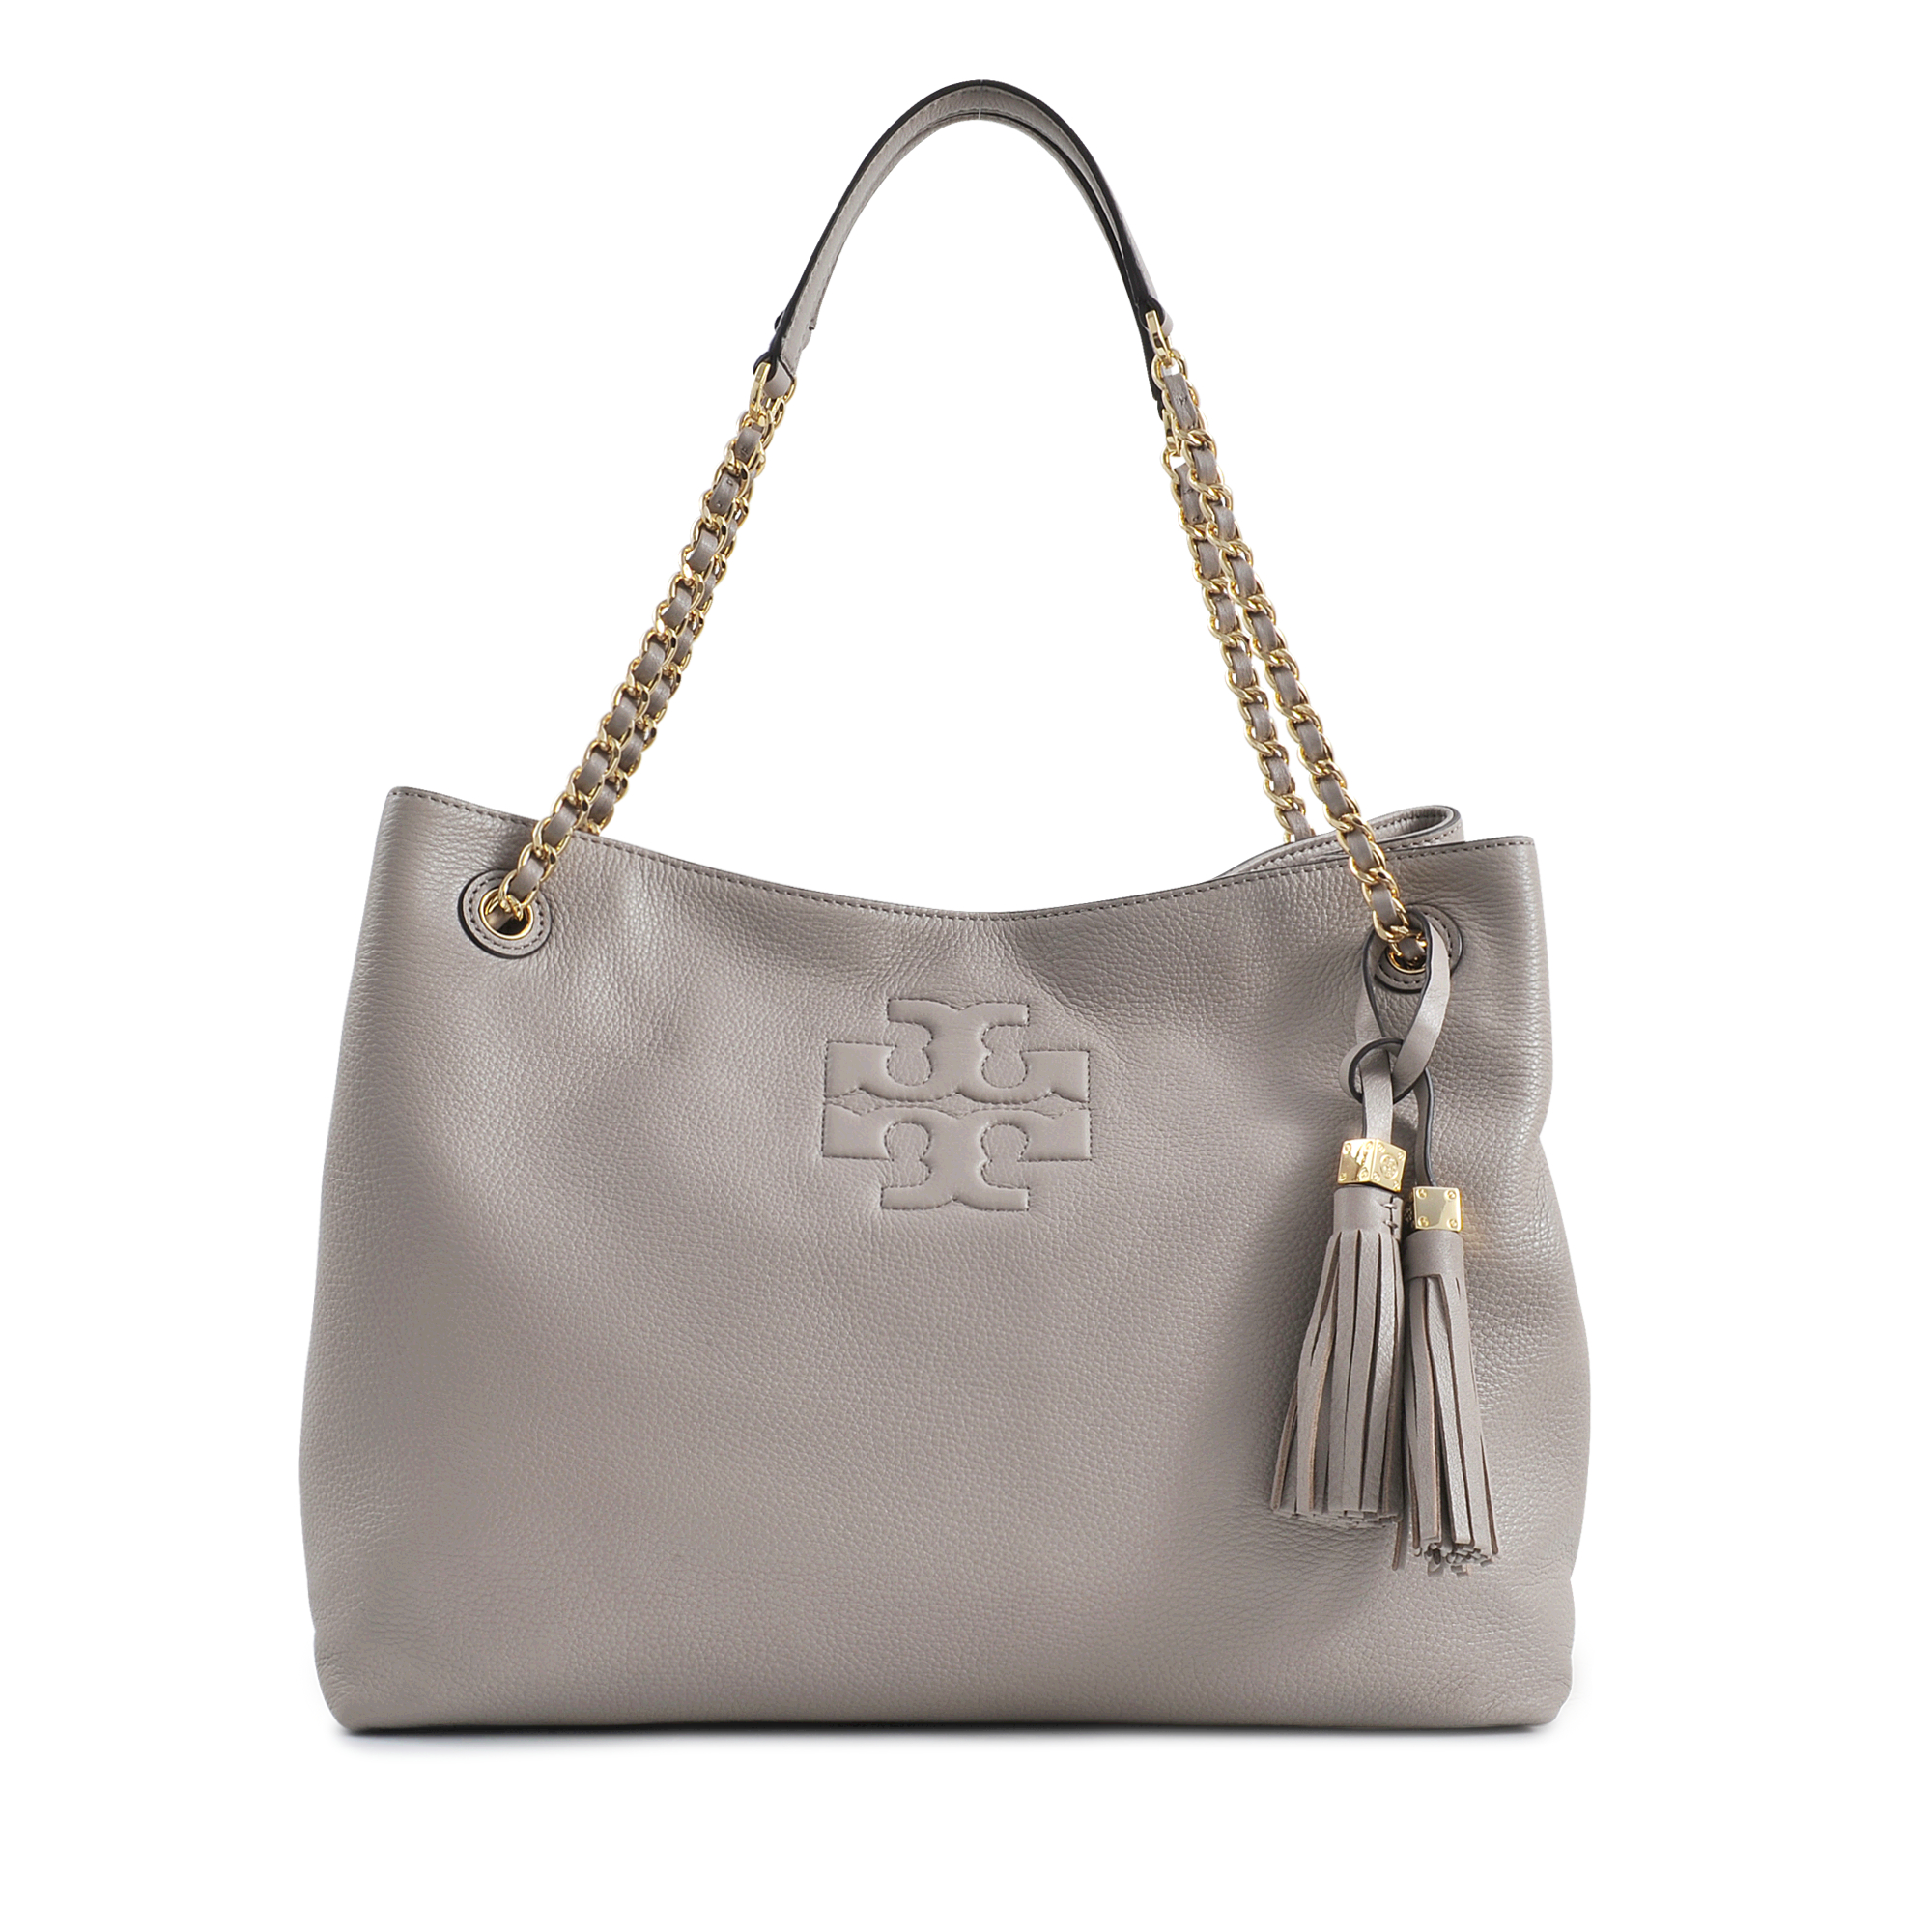 Tory Burch Thea Chain Shoulder Slouchy Tote in Gray